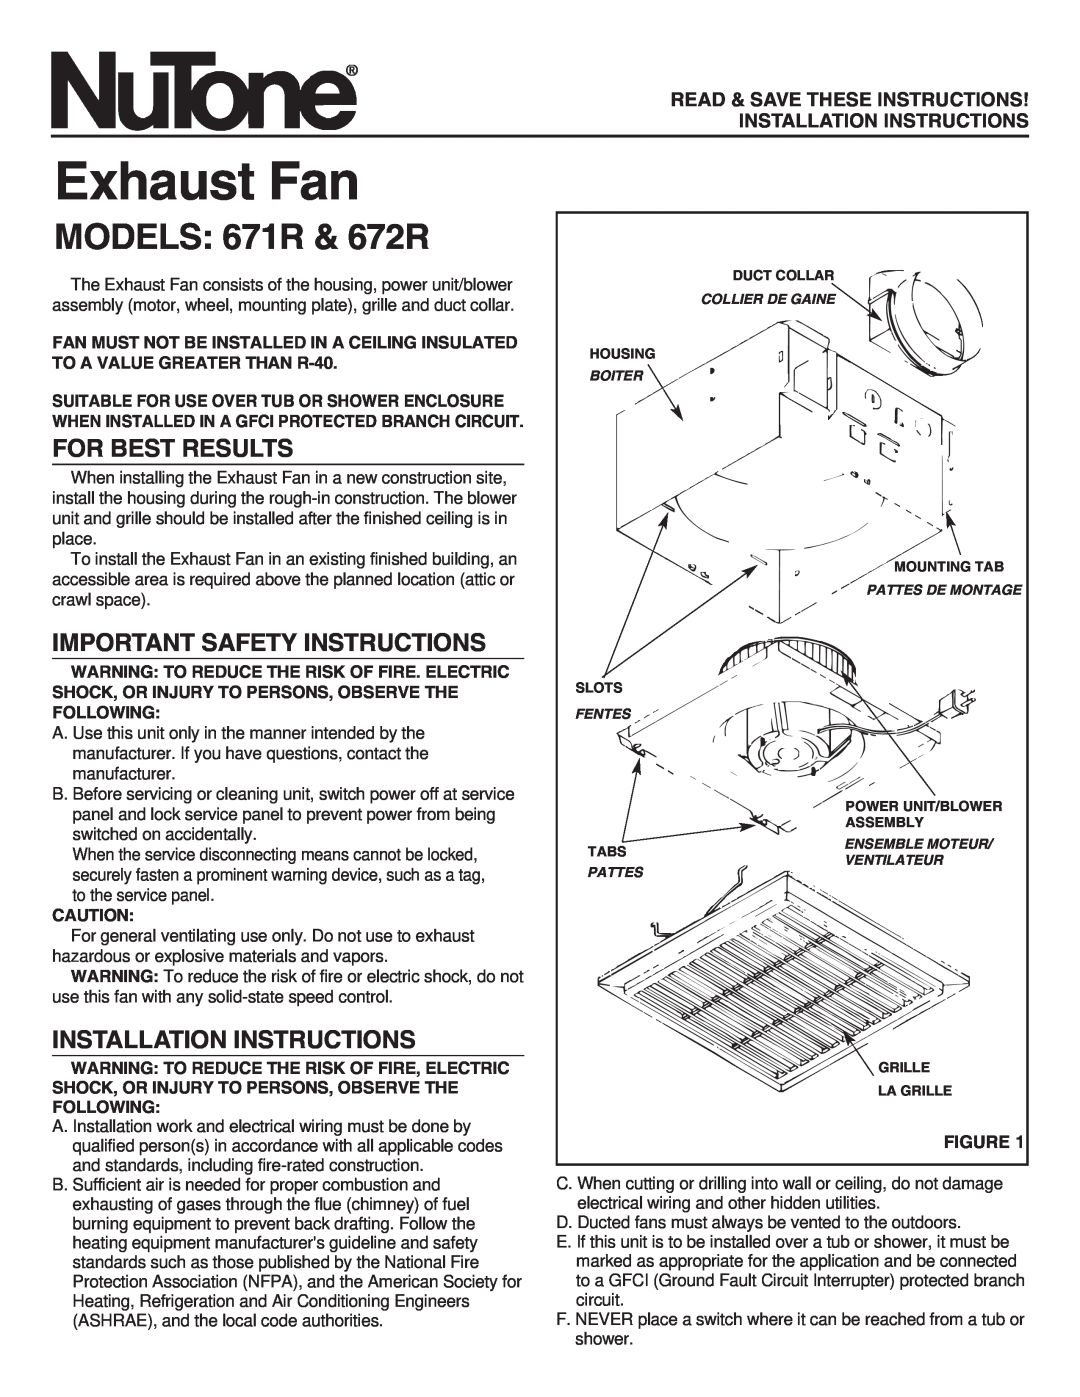 NuTone important safety instructions Exhaust Fan, MODELS 671R & 672R, For Best Results, Important Safety Instructions 